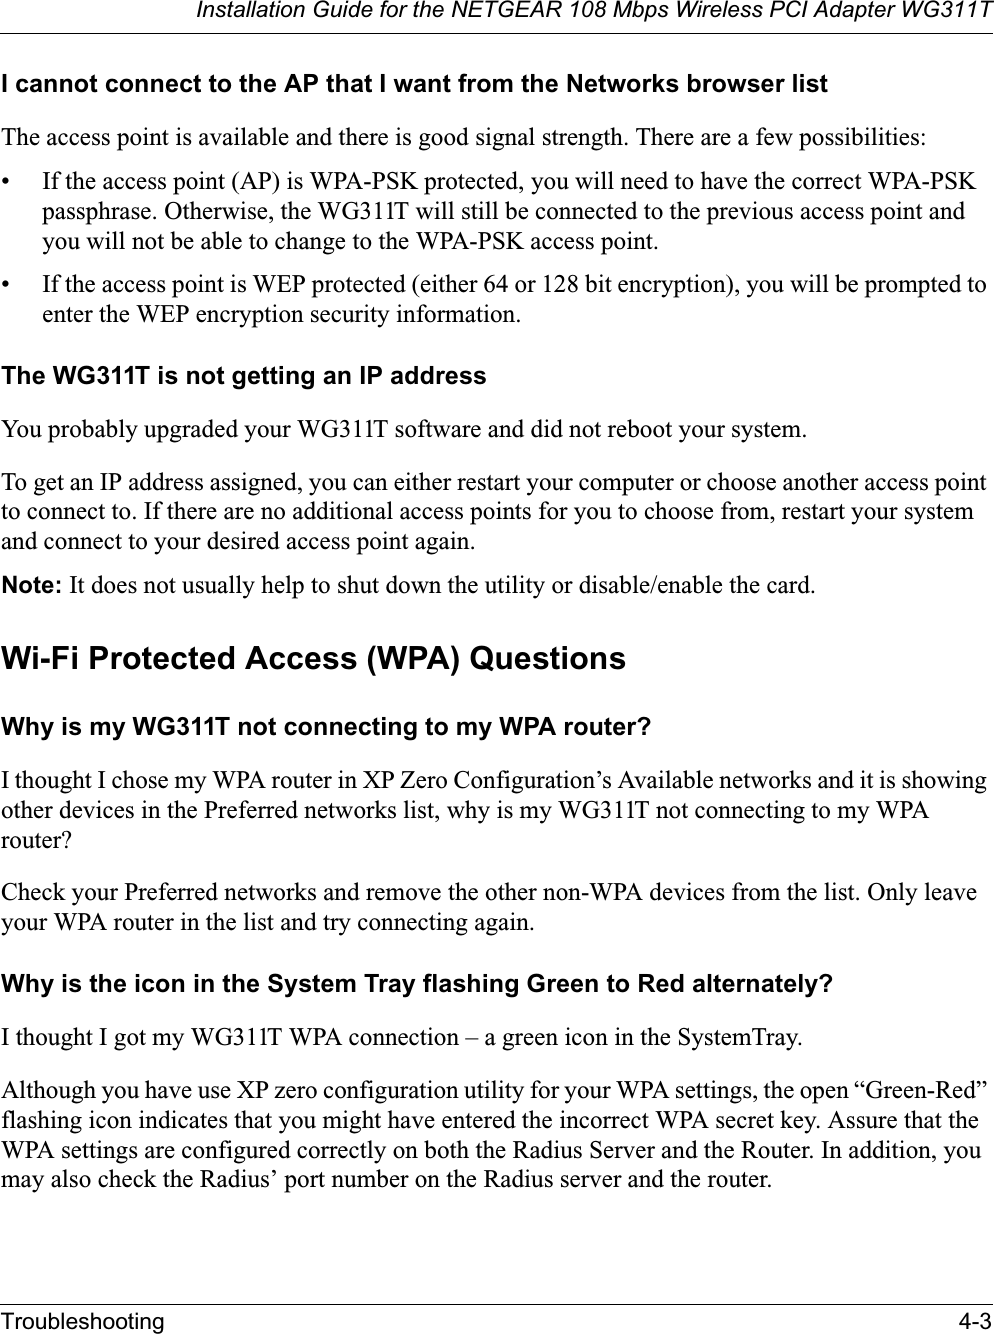 Installation Guide for the NETGEAR 108 Mbps Wireless PCI Adapter WG311TTroubleshooting 4-3I cannot connect to the AP that I want from the Networks browser listThe access point is available and there is good signal strength. There are a few possibilities:• If the access point (AP) is WPA-PSK protected, you will need to have the correct WPA-PSK passphrase. Otherwise, the WG311T will still be connected to the previous access point and you will not be able to change to the WPA-PSK access point.• If the access point is WEP protected (either 64 or 128 bit encryption), you will be prompted to enter the WEP encryption security information.The WG311T is not getting an IP addressYou probably upgraded your WG311T software and did not reboot your system. To get an IP address assigned, you can either restart your computer or choose another access point to connect to. If there are no additional access points for you to choose from, restart your system and connect to your desired access point again. Note: It does not usually help to shut down the utility or disable/enable the card.Wi-Fi Protected Access (WPA) QuestionsWhy is my WG311T not connecting to my WPA router?I thought I chose my WPA router in XP Zero Configuration’s Available networks and it is showing other devices in the Preferred networks list, why is my WG311T not connecting to my WPA router?Check your Preferred networks and remove the other non-WPA devices from the list. Only leave your WPA router in the list and try connecting again. Why is the icon in the System Tray flashing Green to Red alternately?I thought I got my WG311T WPA connection – a green icon in the SystemTray. Although you have use XP zero configuration utility for your WPA settings, the open “Green-Red” flashing icon indicates that you might have entered the incorrect WPA secret key. Assure that the WPA settings are configured correctly on both the Radius Server and the Router. In addition, you may also check the Radius’ port number on the Radius server and the router.   